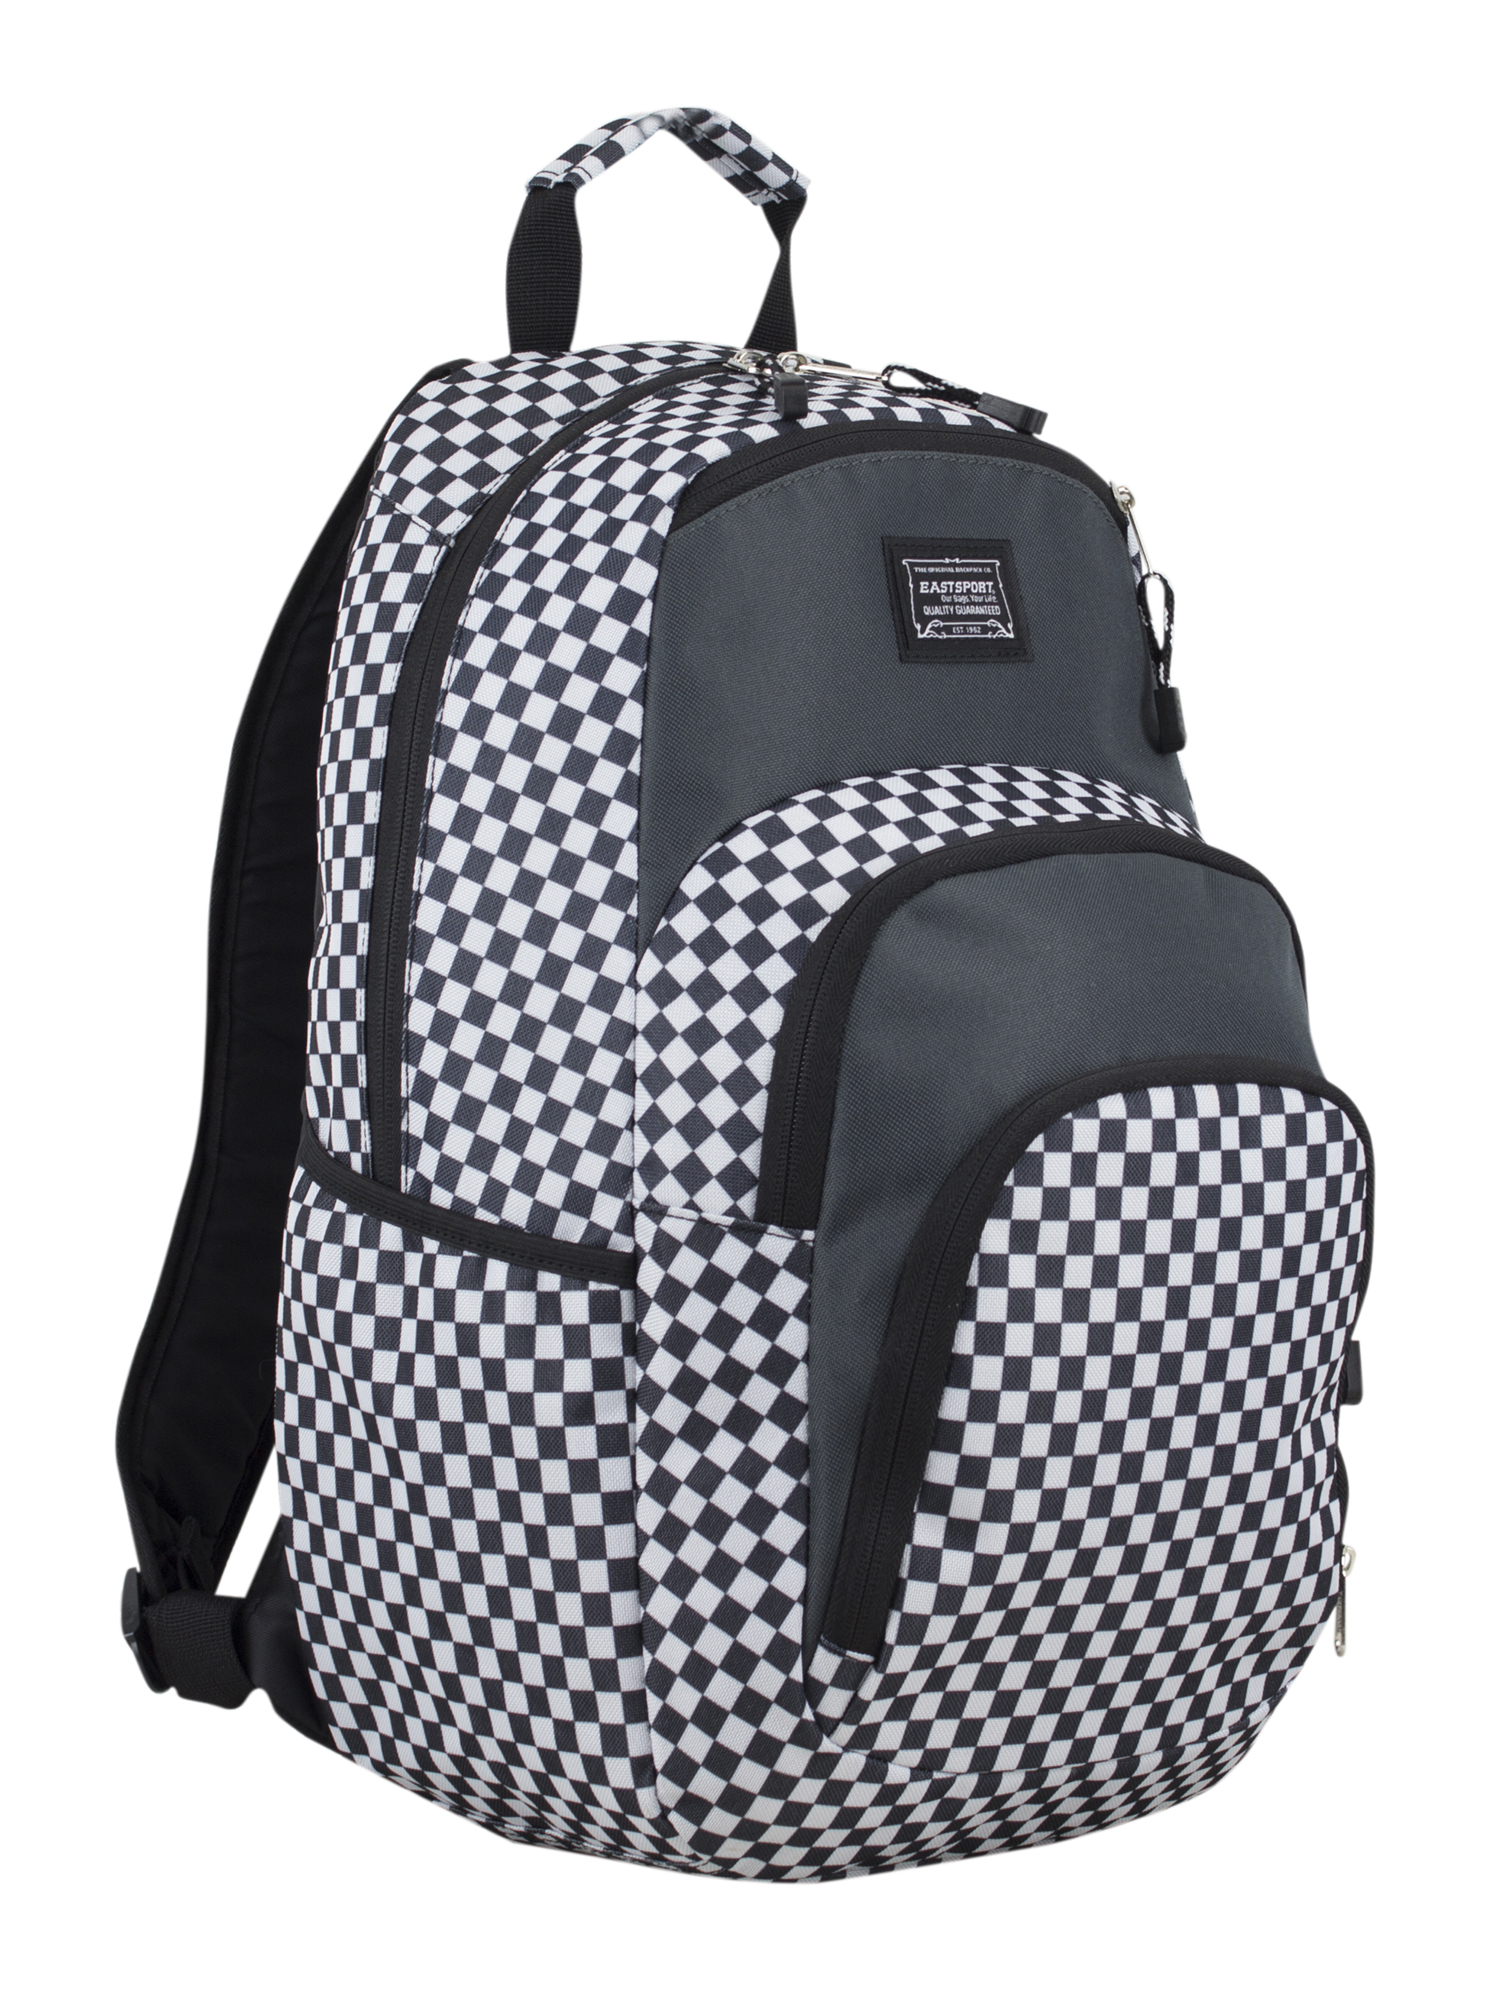 Eastsport Sport Tier Athleisure Checker Plaid Backpack with Adjustable Straps - image 1 of 7